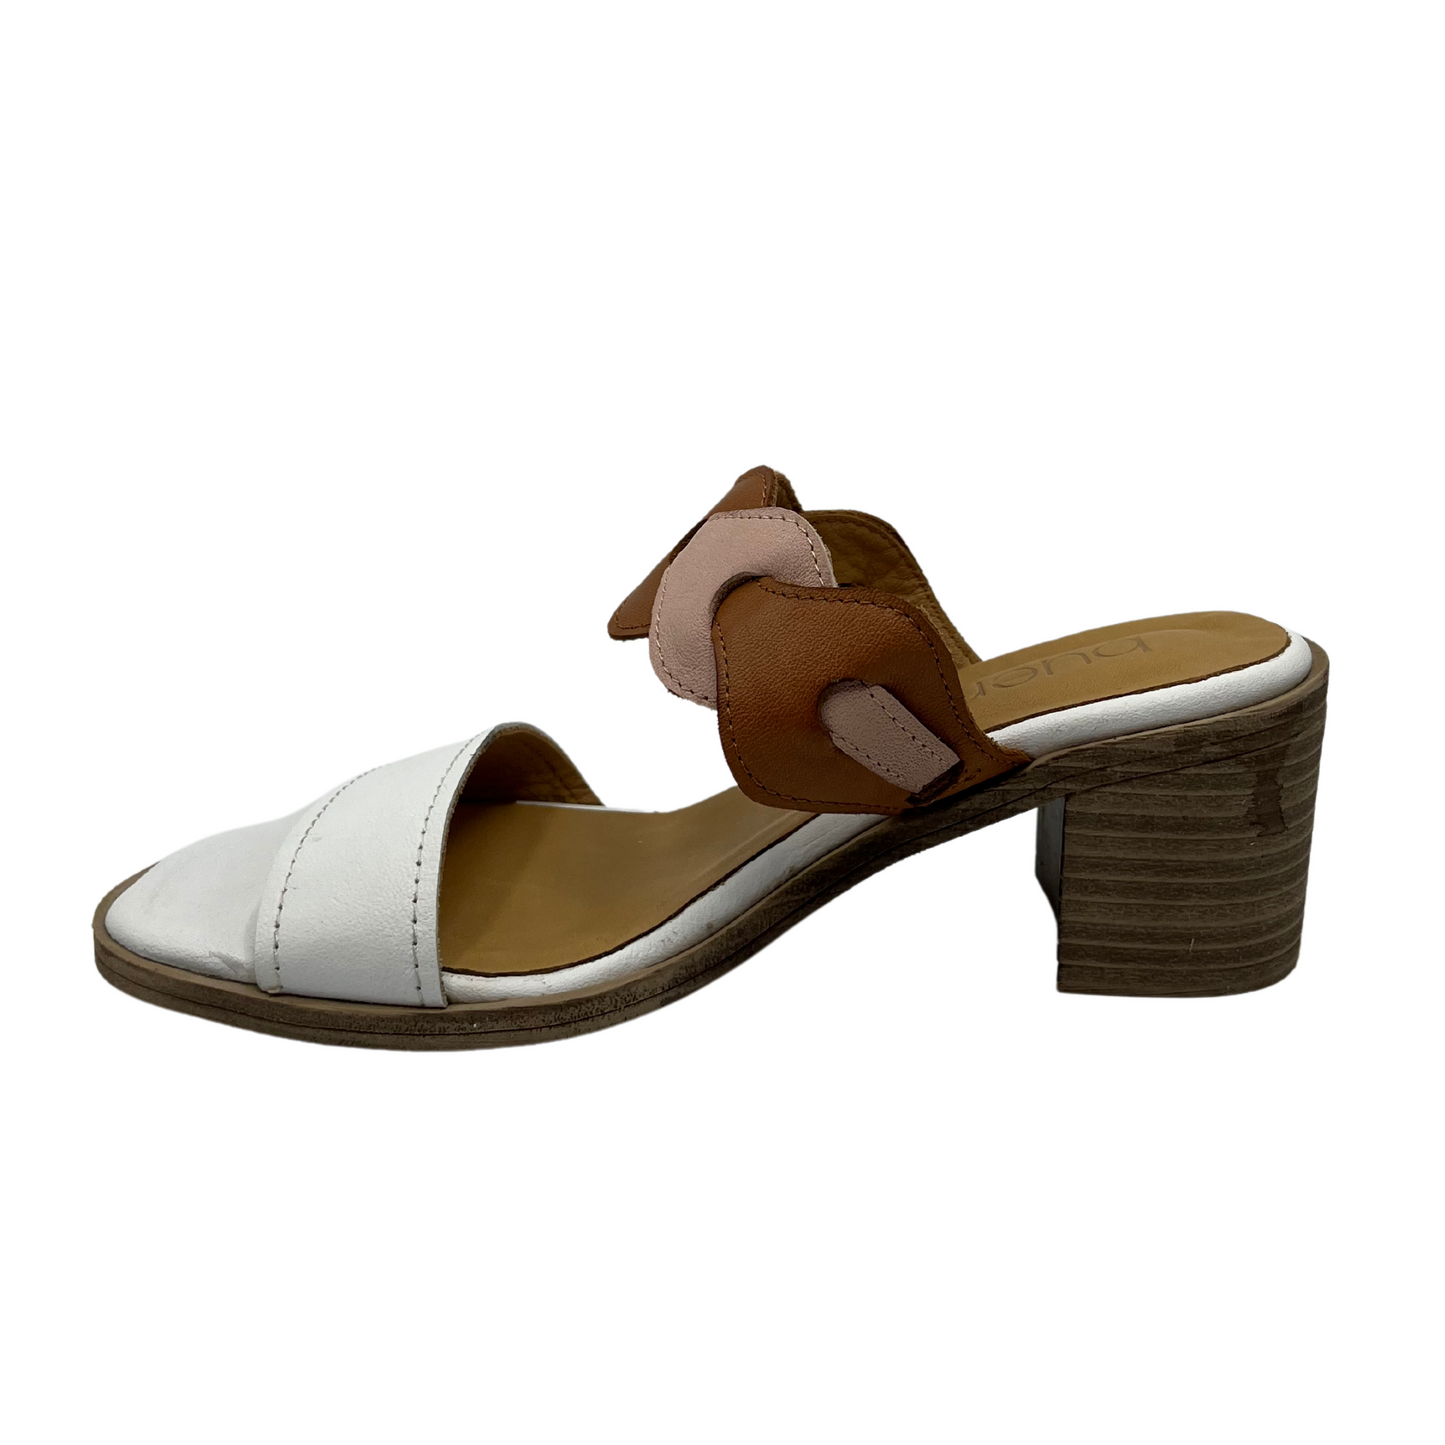 Left facing view of leather sandal with square toe, white toe strap and brown upper strap and short block heel